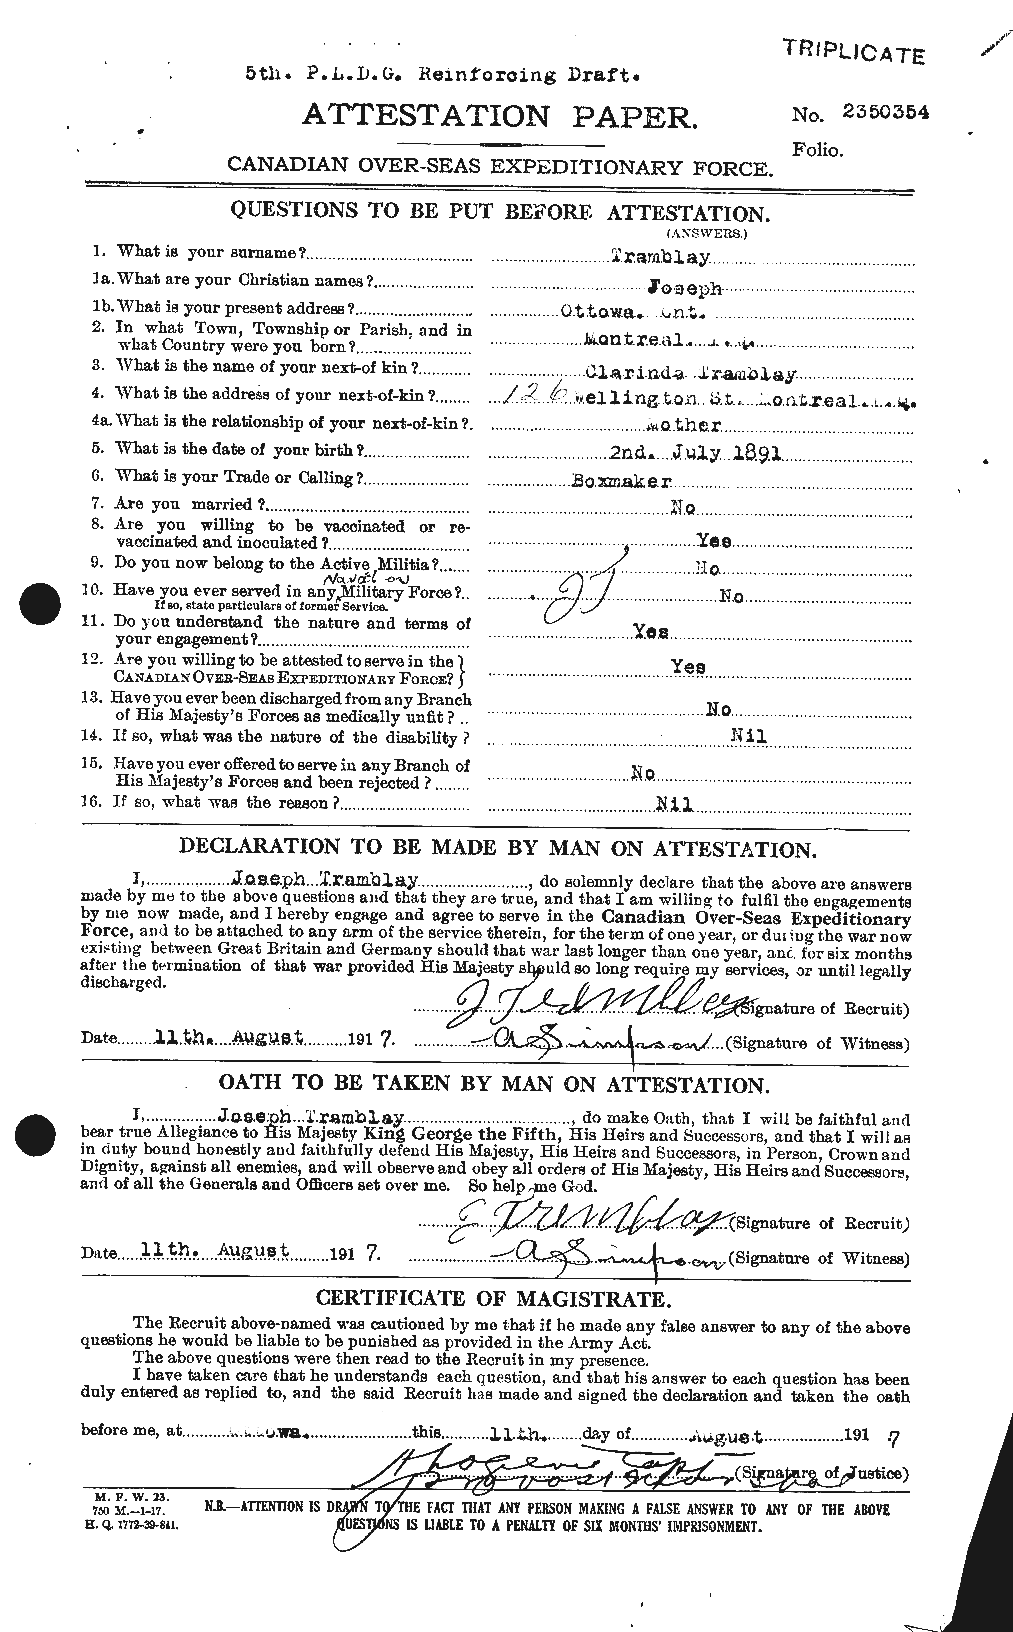 Personnel Records of the First World War - CEF 639133a